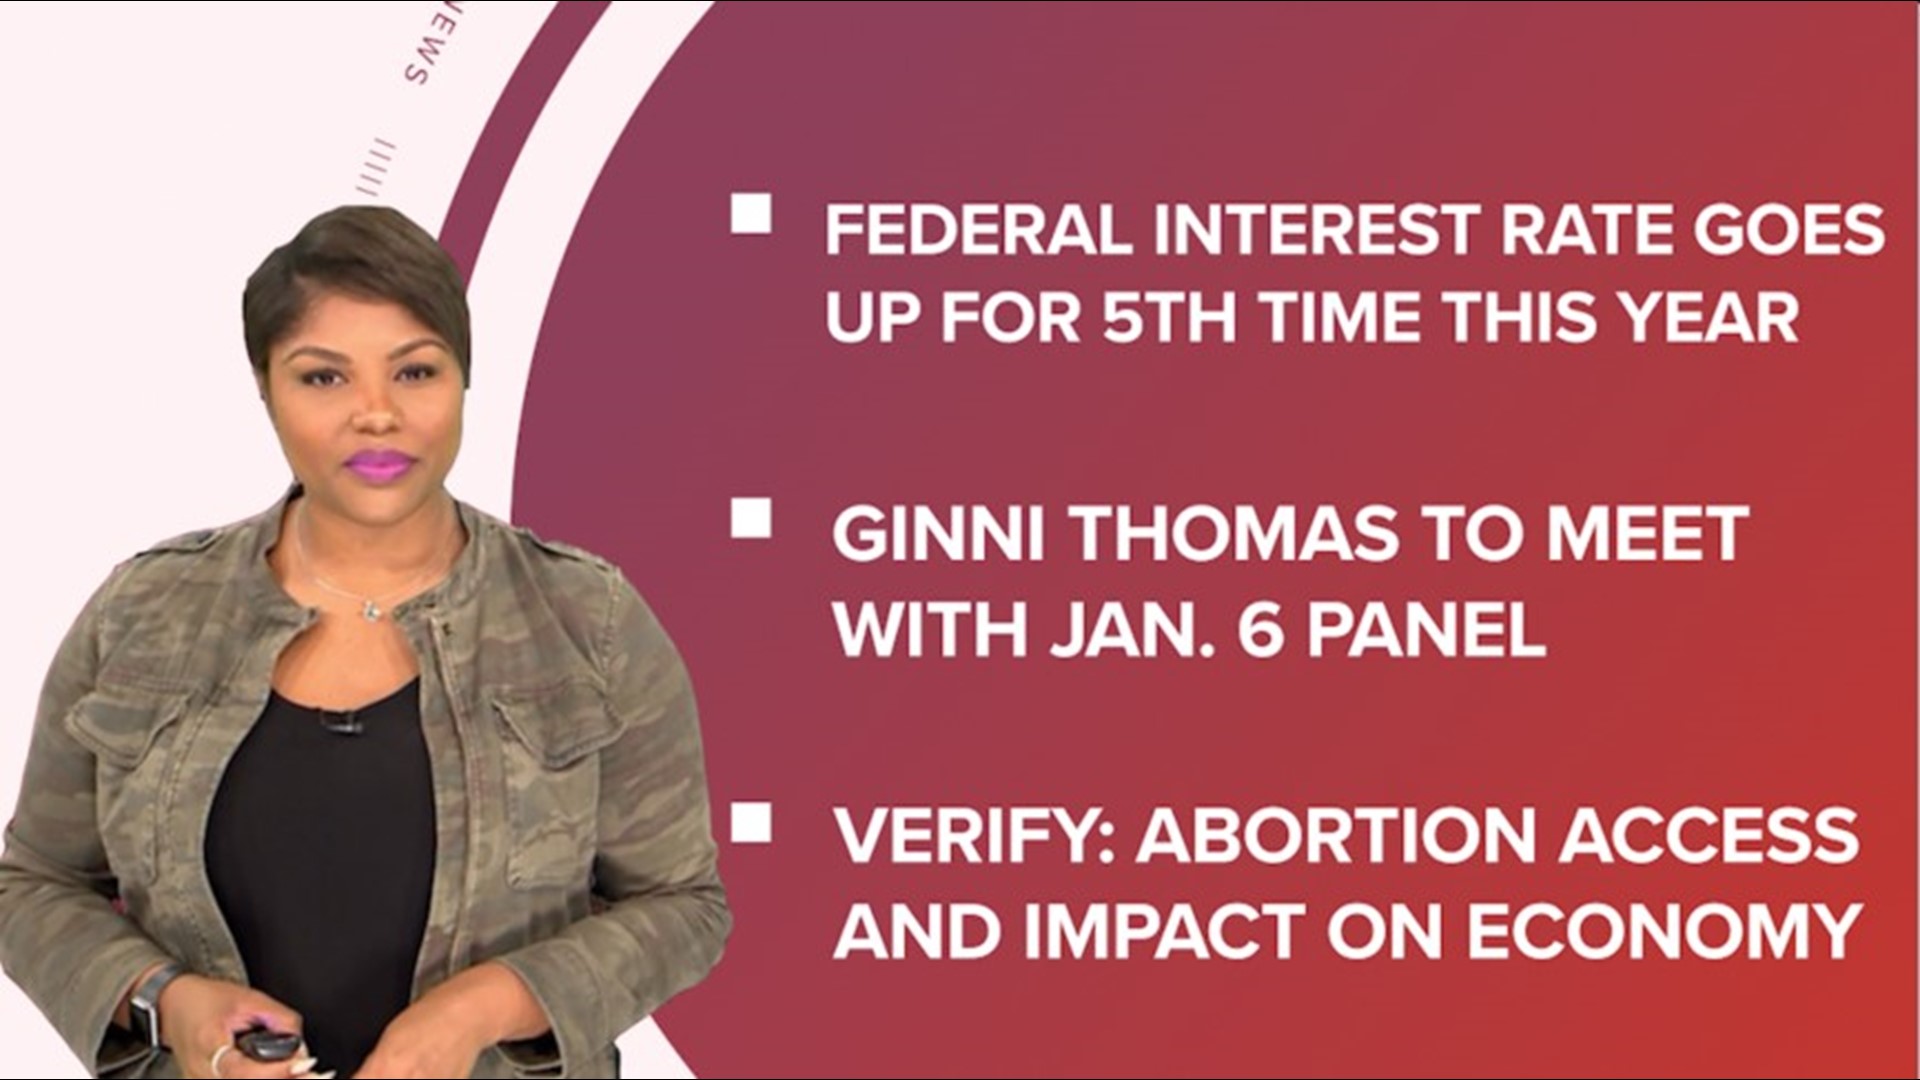 A look at what is happening in the news from Ginni Thomas agreeing to meet with the Jan. 6 panel to the federal interest rate hike and new images of Neptune.